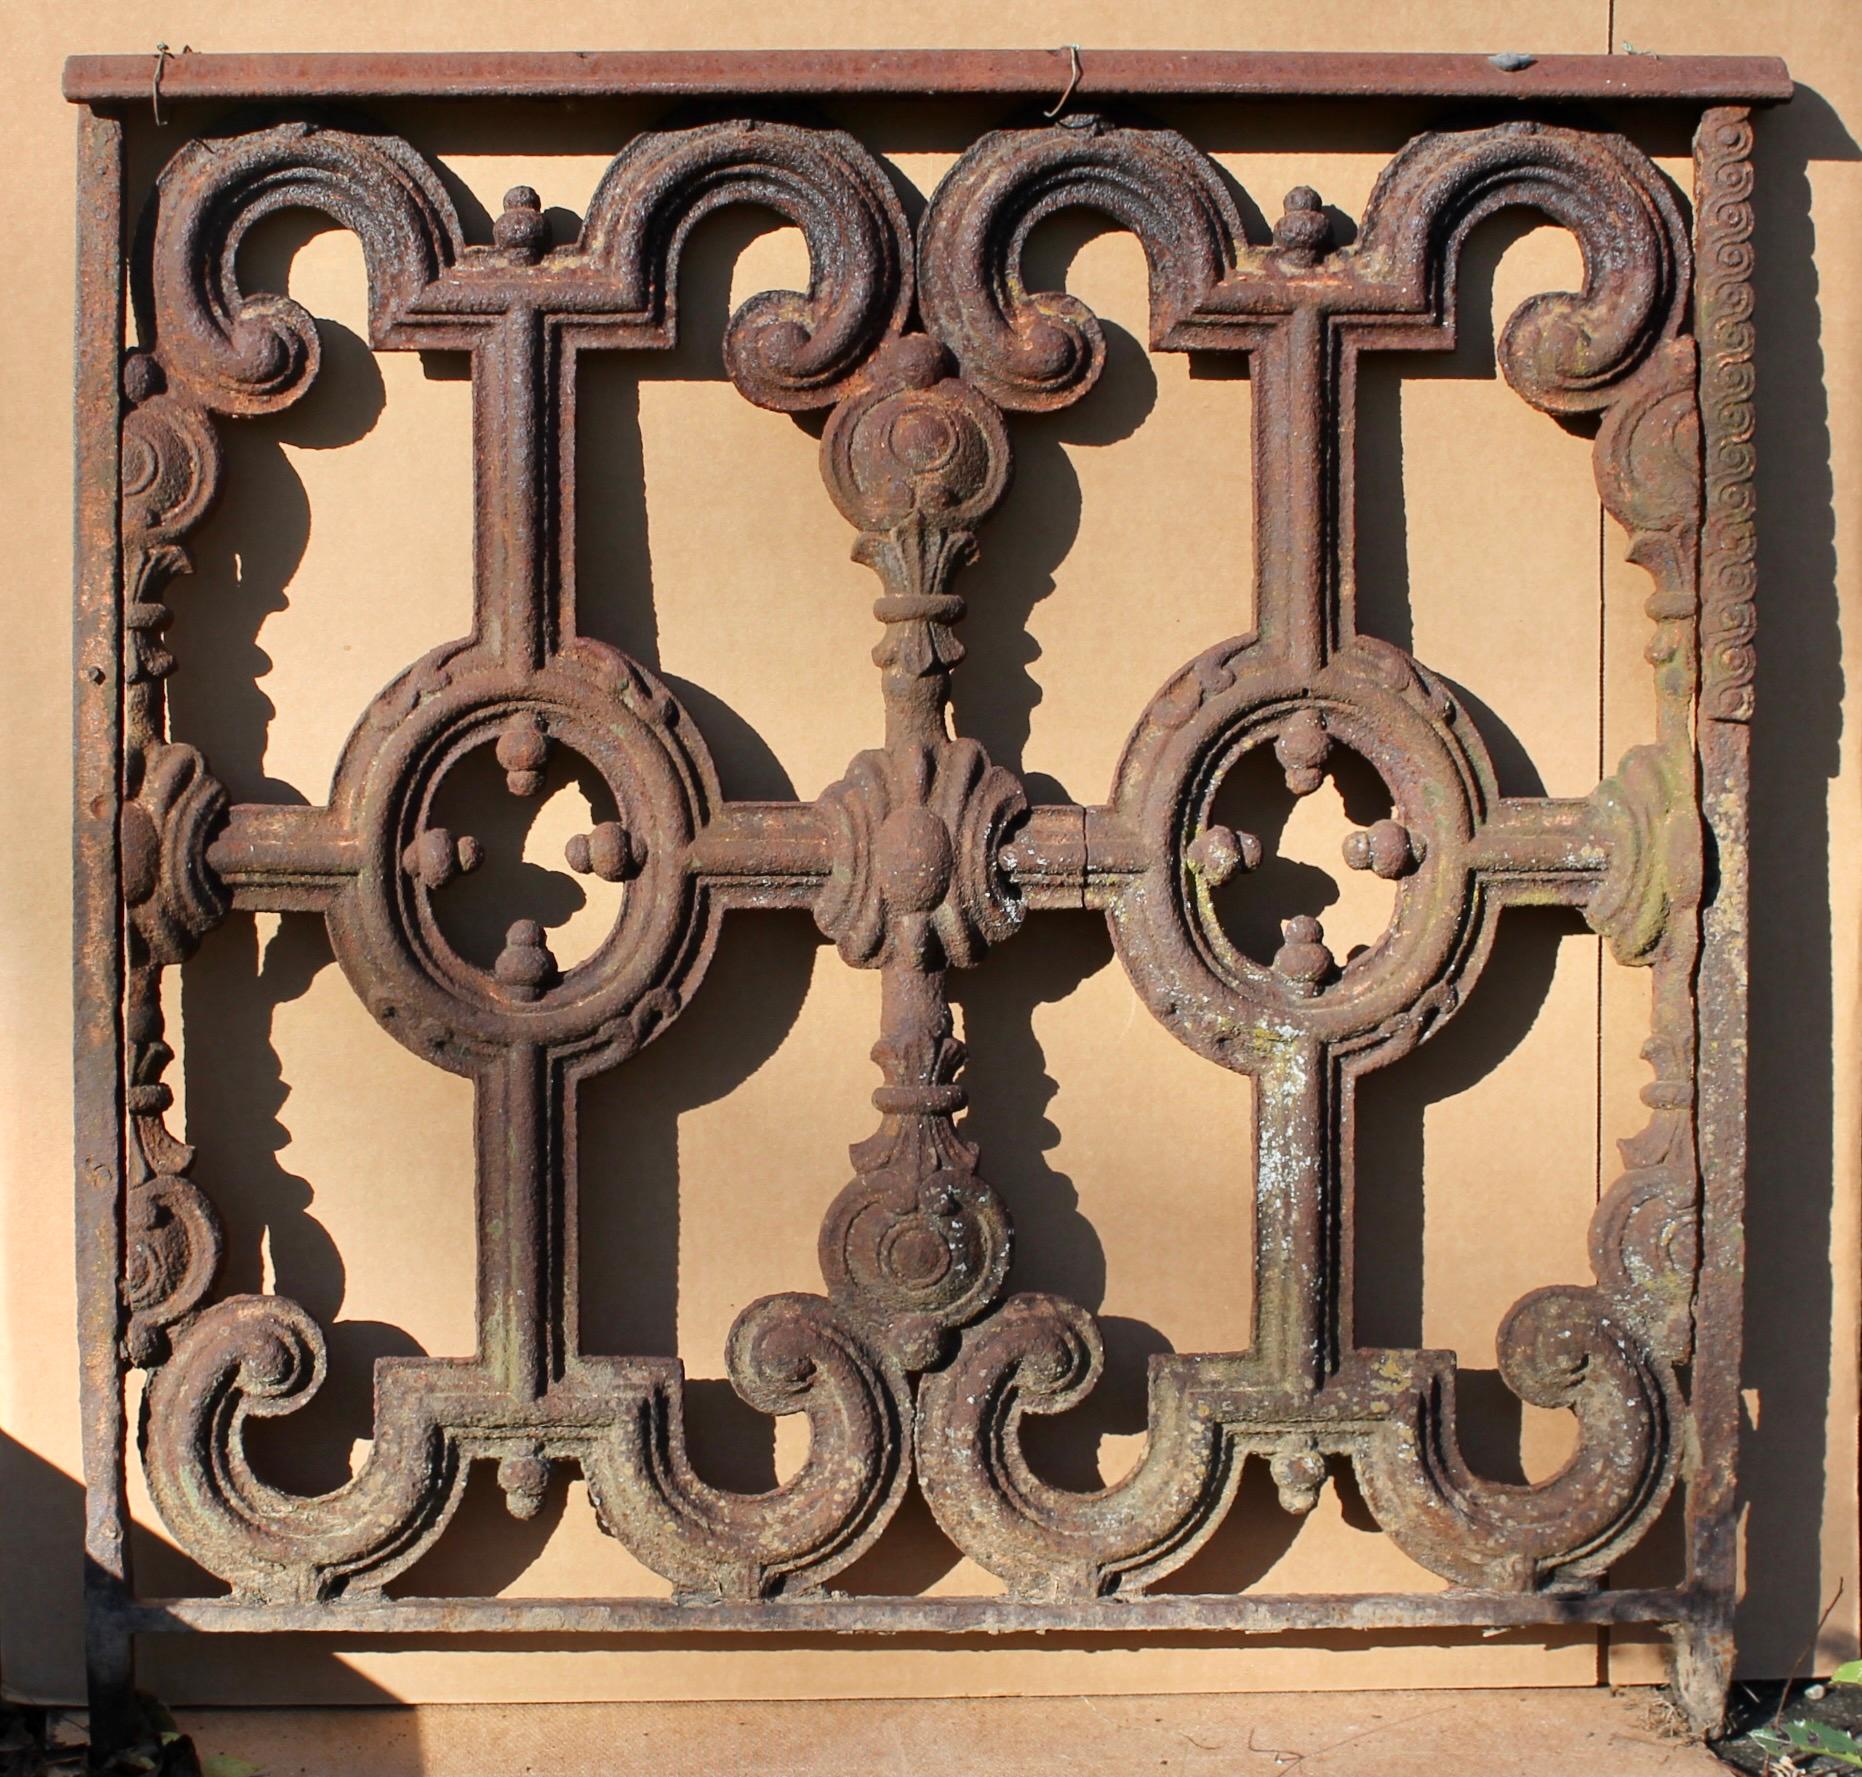 A muscular Gothic Revival cast iron balustrade, American or possibly English Industrial Revolution. Found in New York State Hudson Valley. Topped with a railing which is easily removable